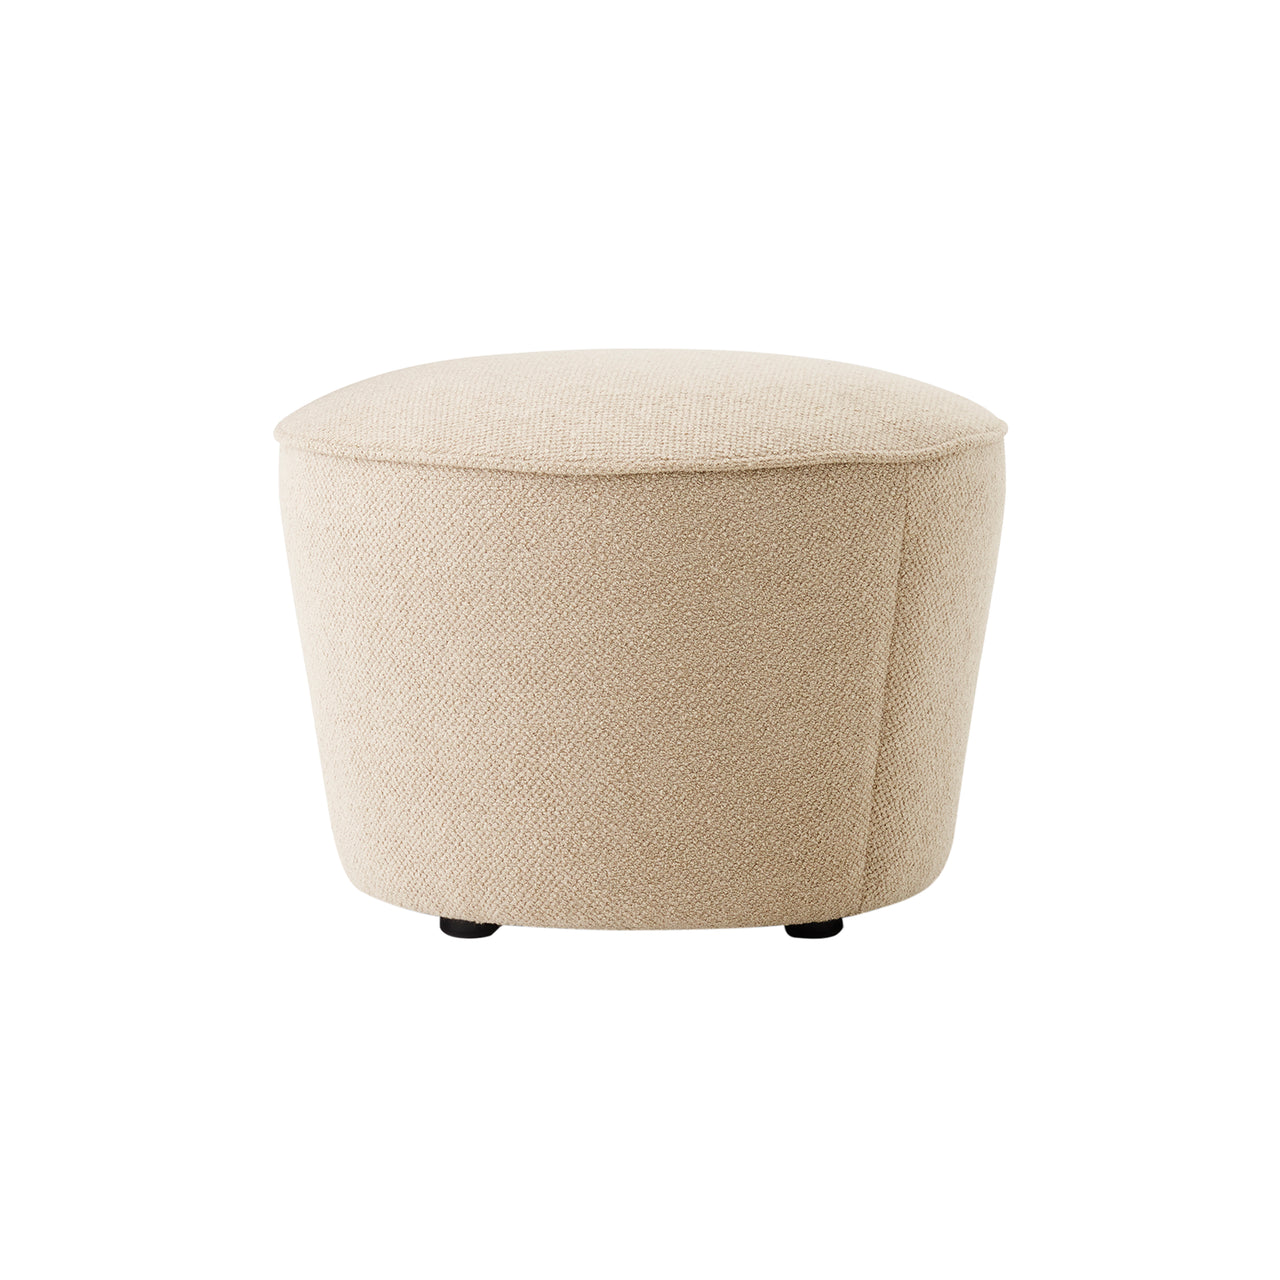 Cairn Pouf: Round + Boucle 02